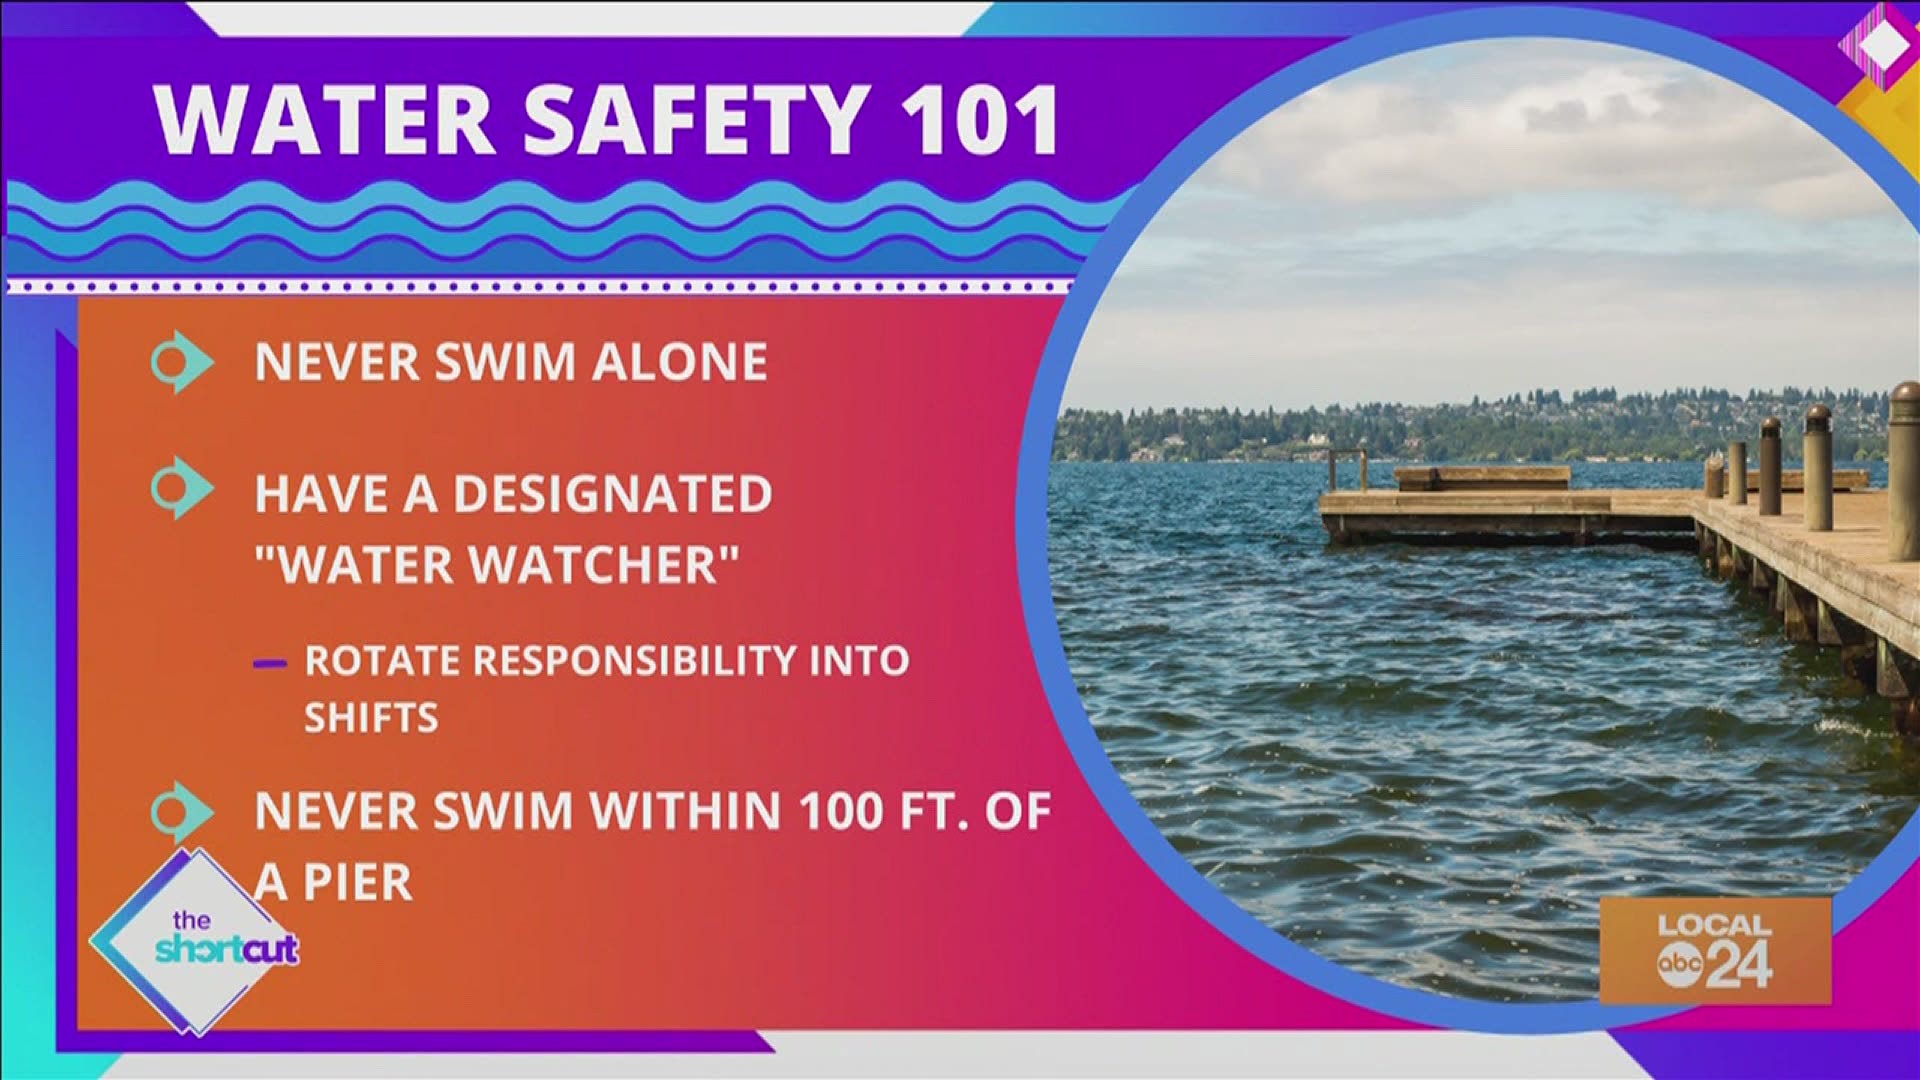 Did you know that drowning is one of the top unintentional injury deaths in America? Join Sydney Neely and check out these drowning prevention tips for more insight!